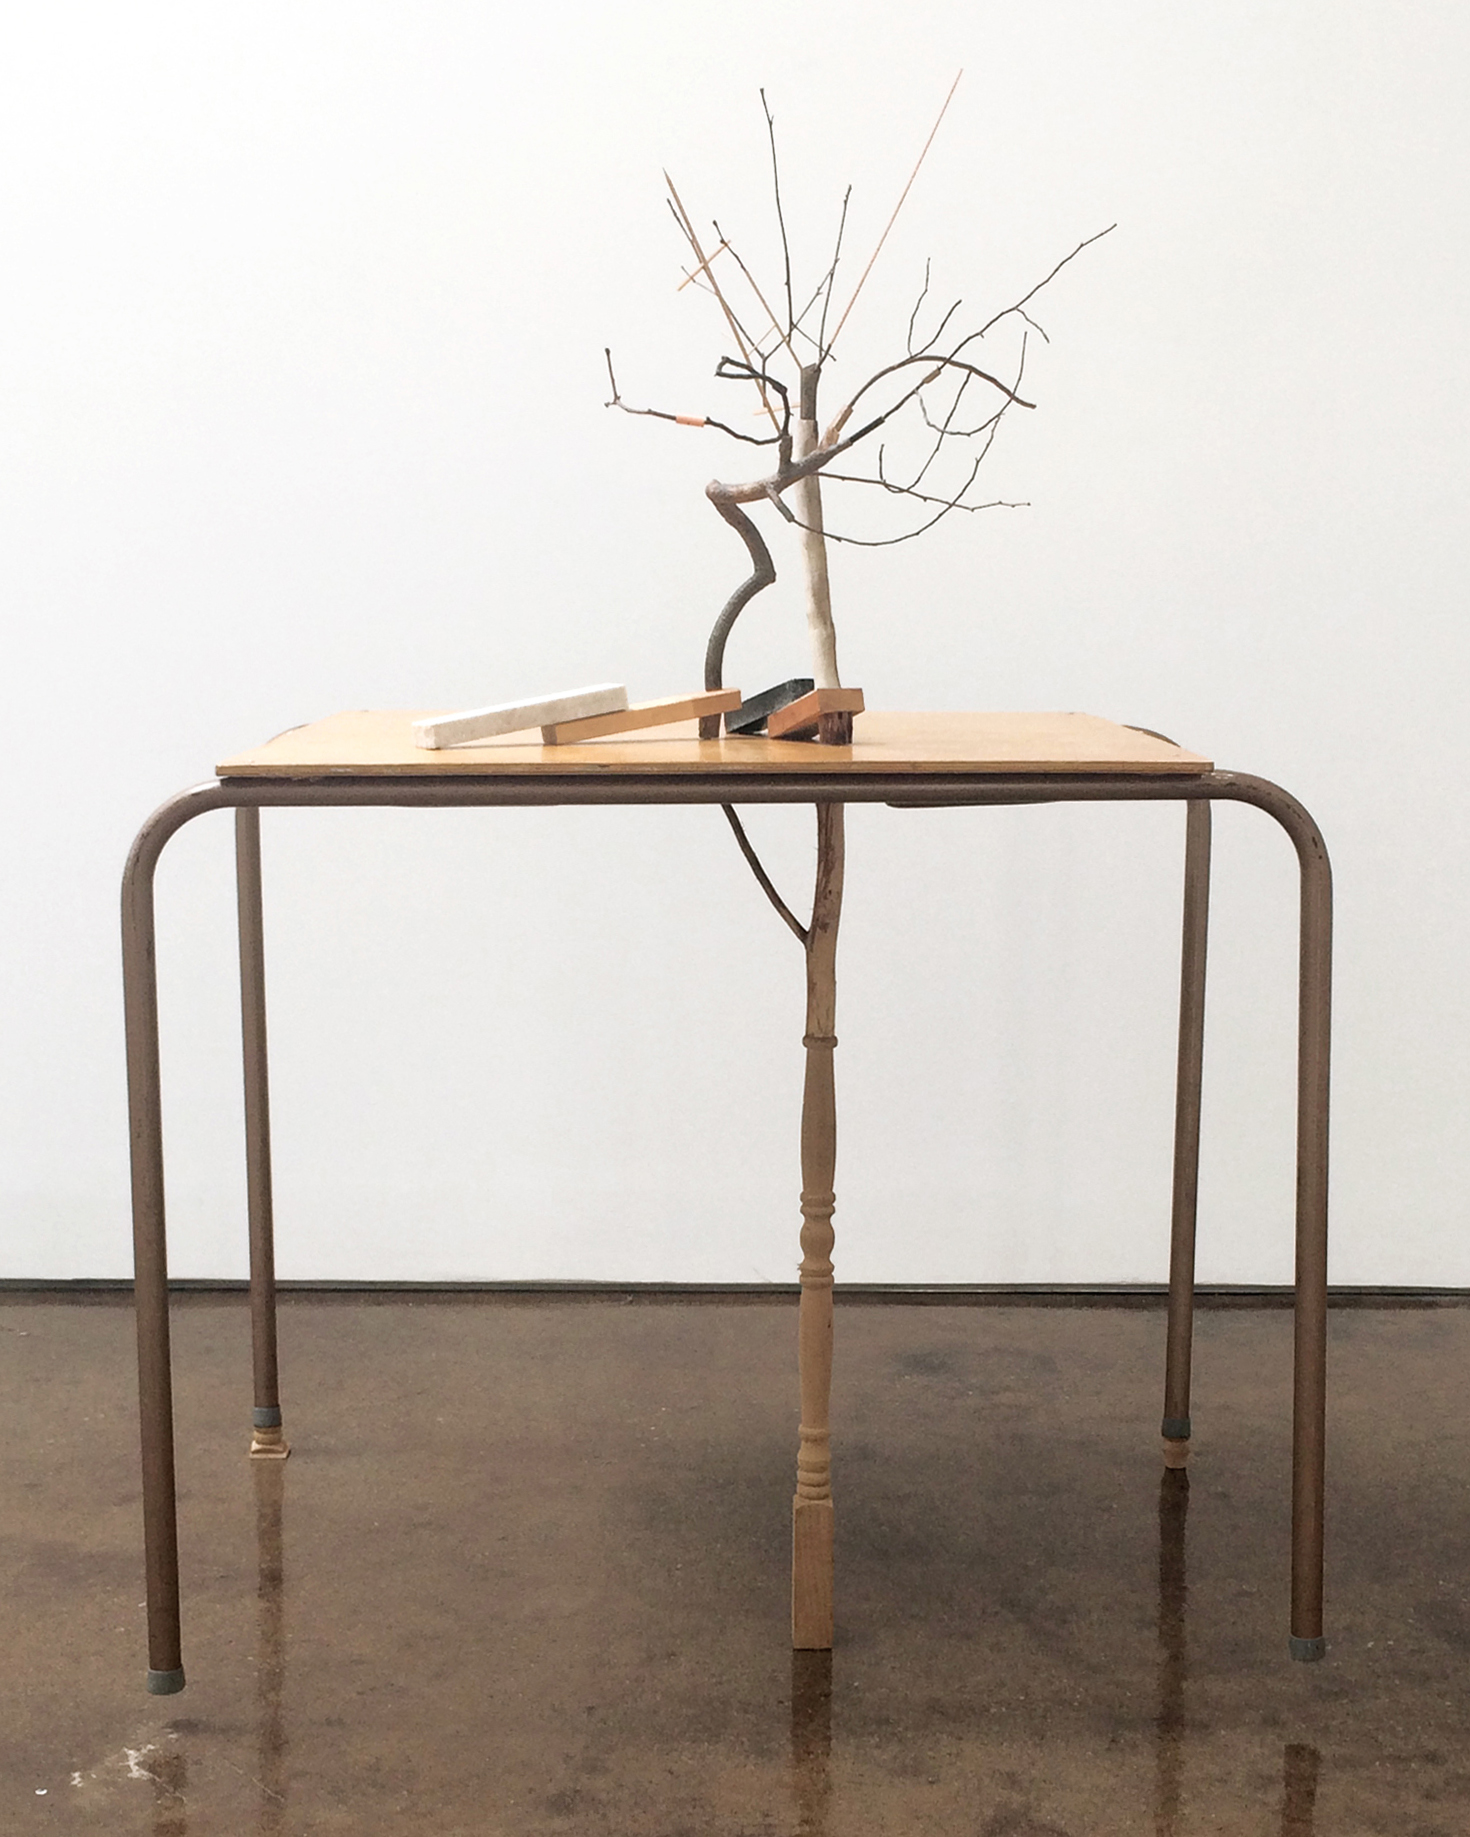   leter arber  &nbsp;2017 twigs, mixed media wood products, marble, granite, table 52 x 37 x 30 inches 